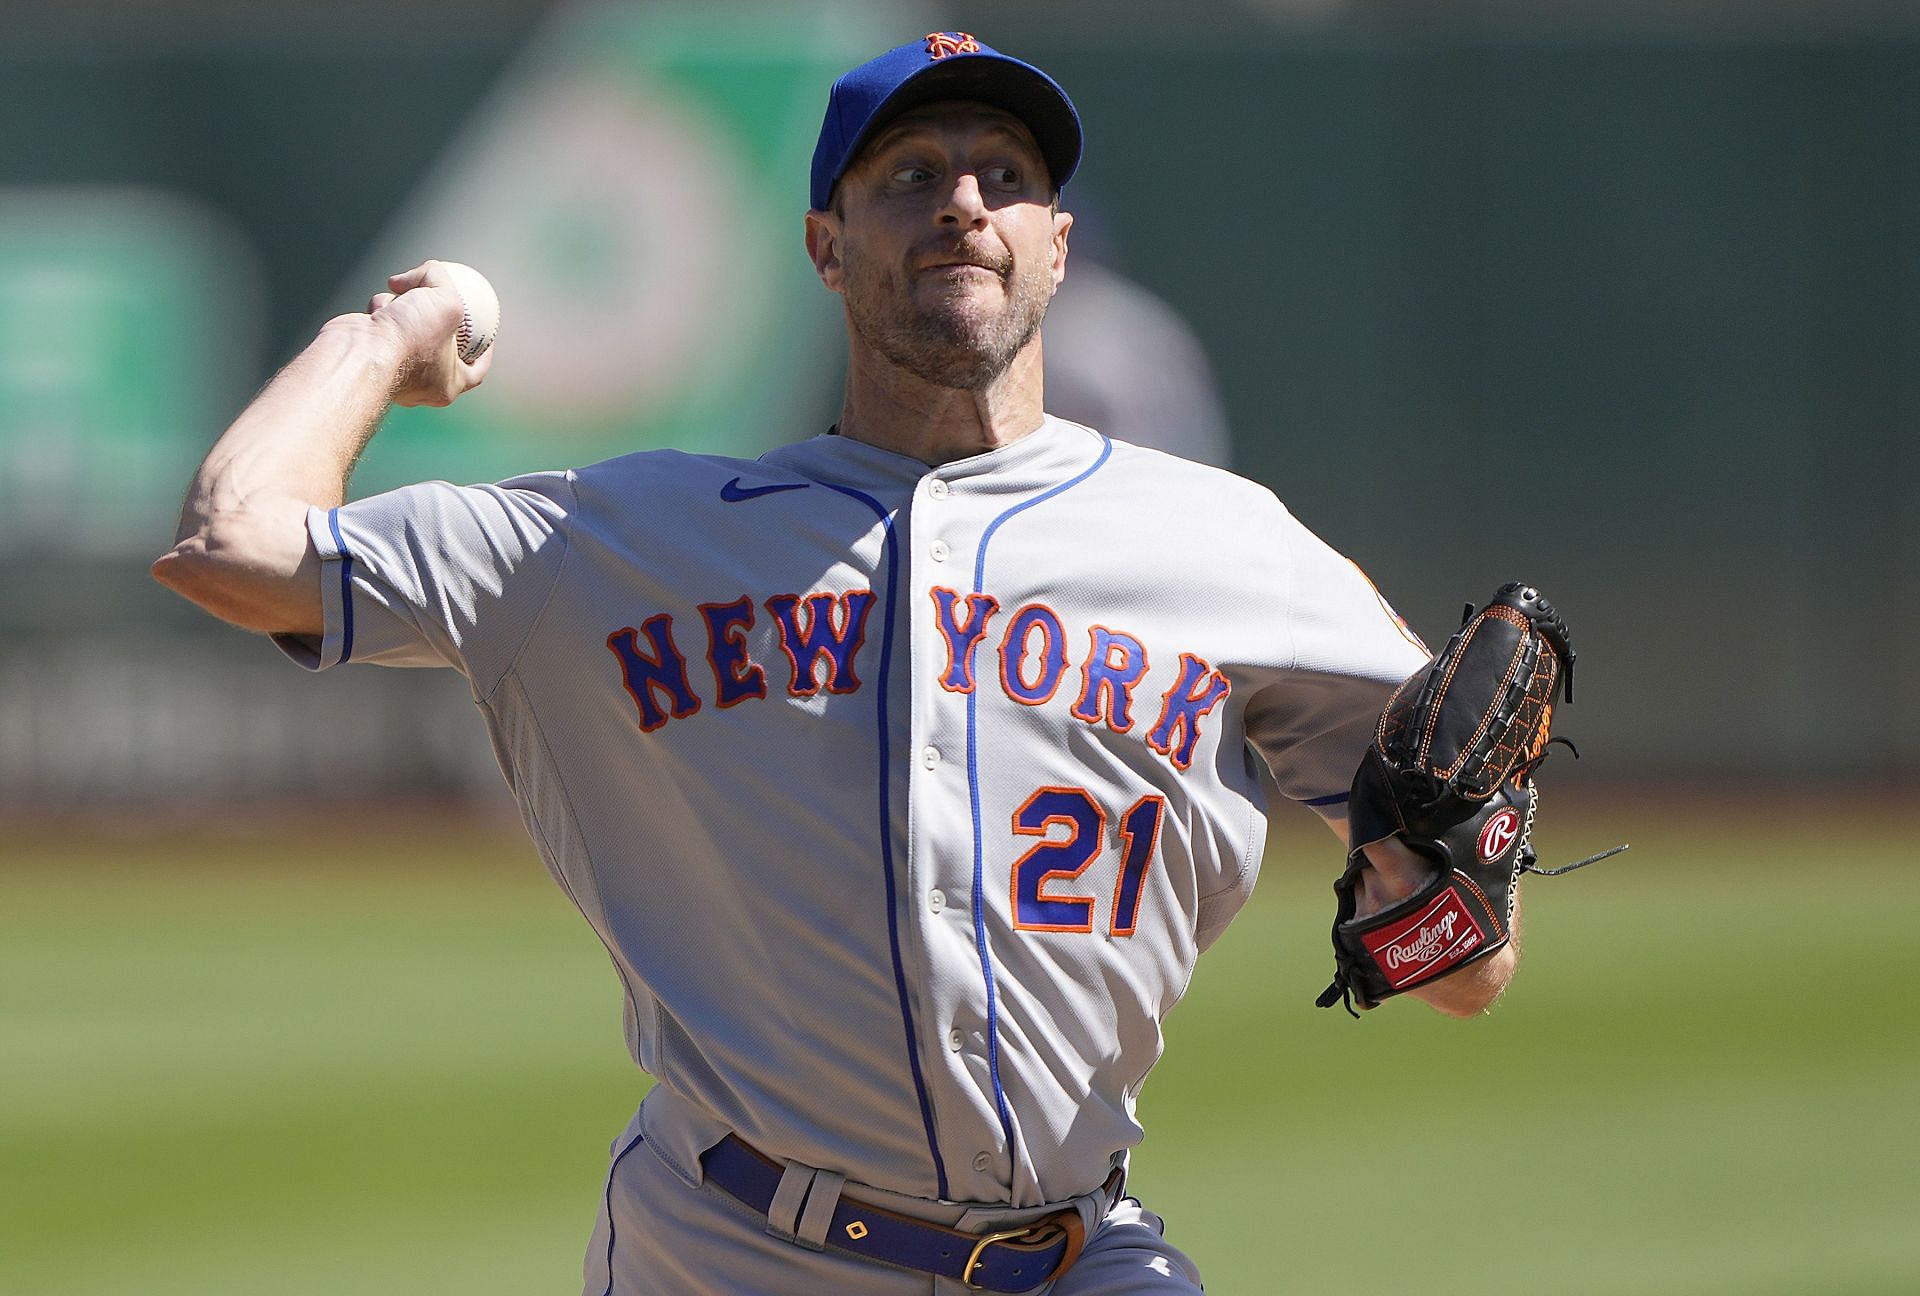 Max Scherzer is easing into a return with the NY Mets ahead of the post-season